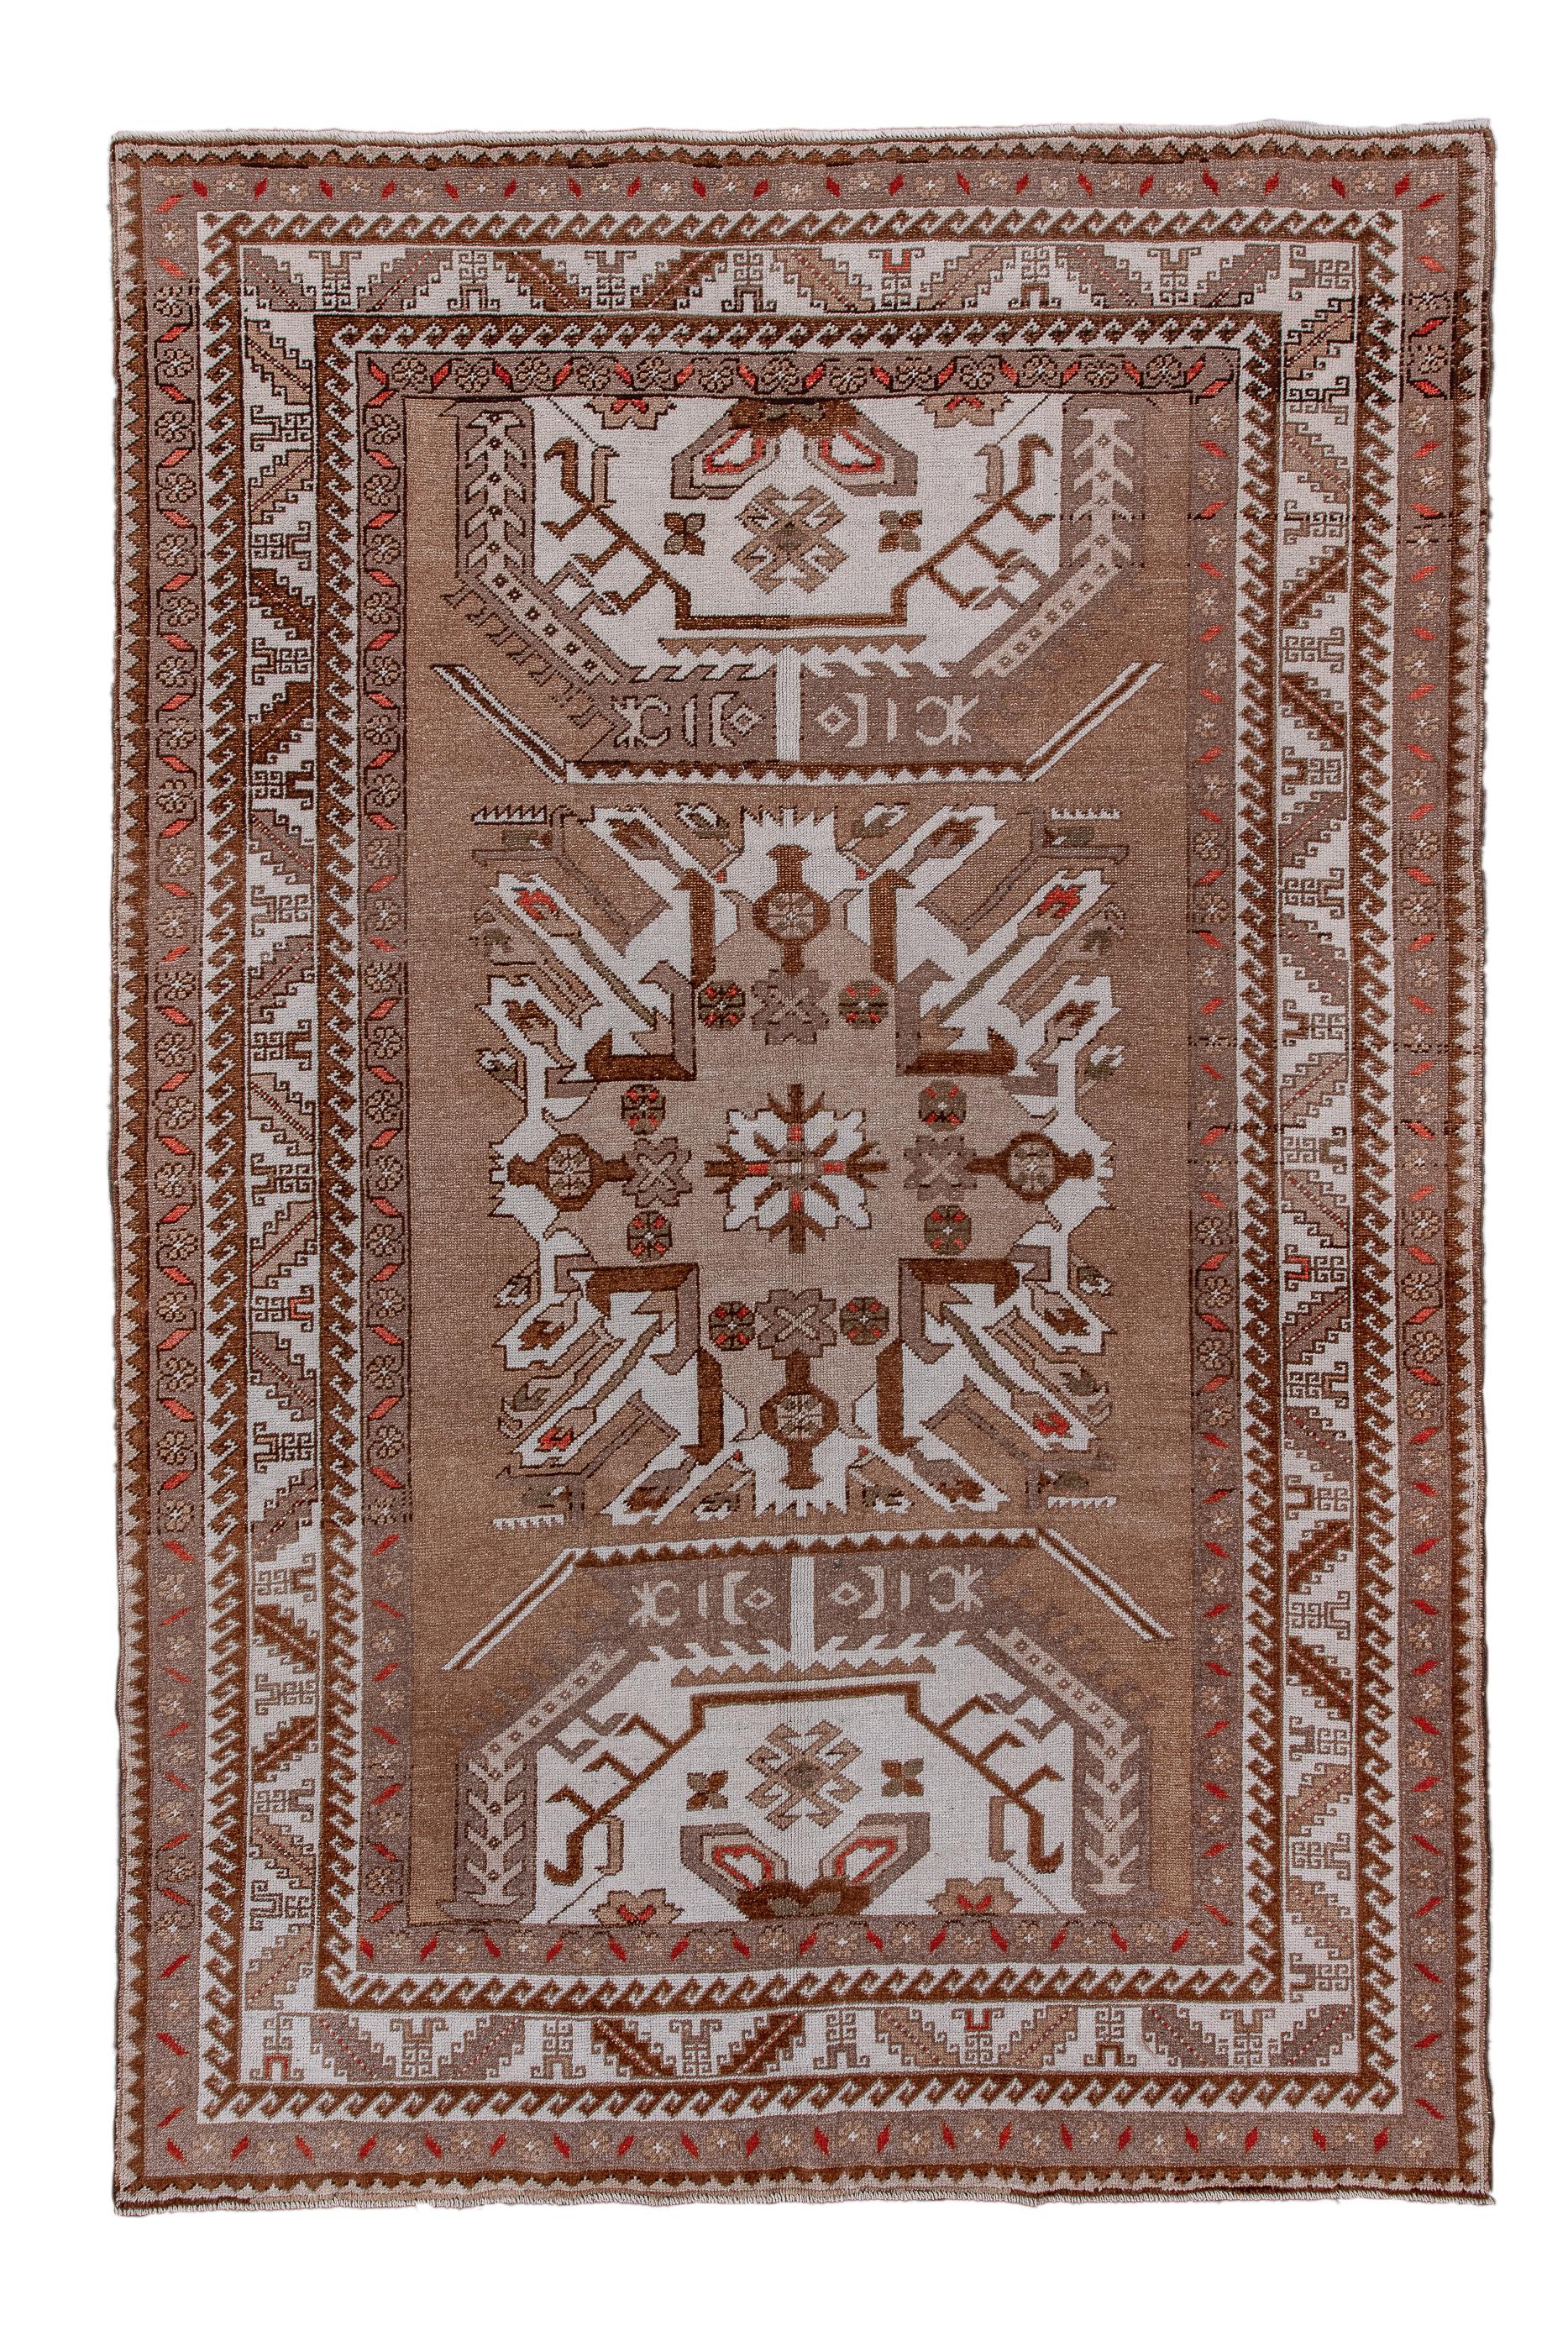 From an outlying bit of the Kazak area, this Turkish large scatter rug shows a simplified version of the “Eagle Kazak” with a characteristic radiating ecru medallion supported by half octagon motives above and below, on a coral ground. Cream strip